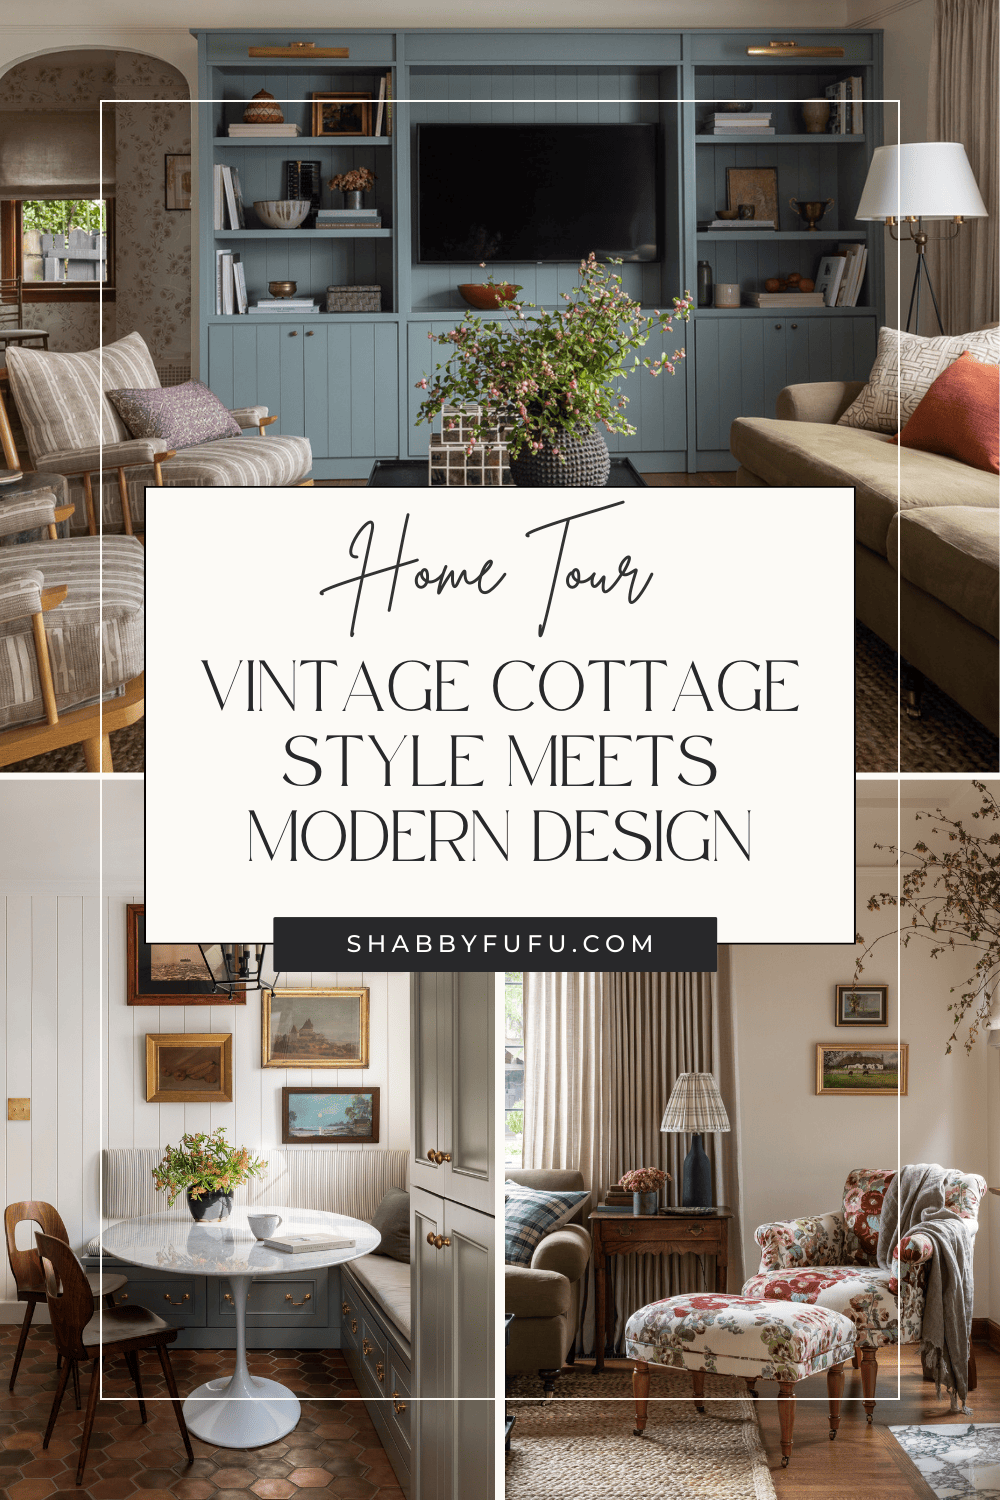 Pinterest decorative graphic showcasing collage of home tour in vintage cottage style decor